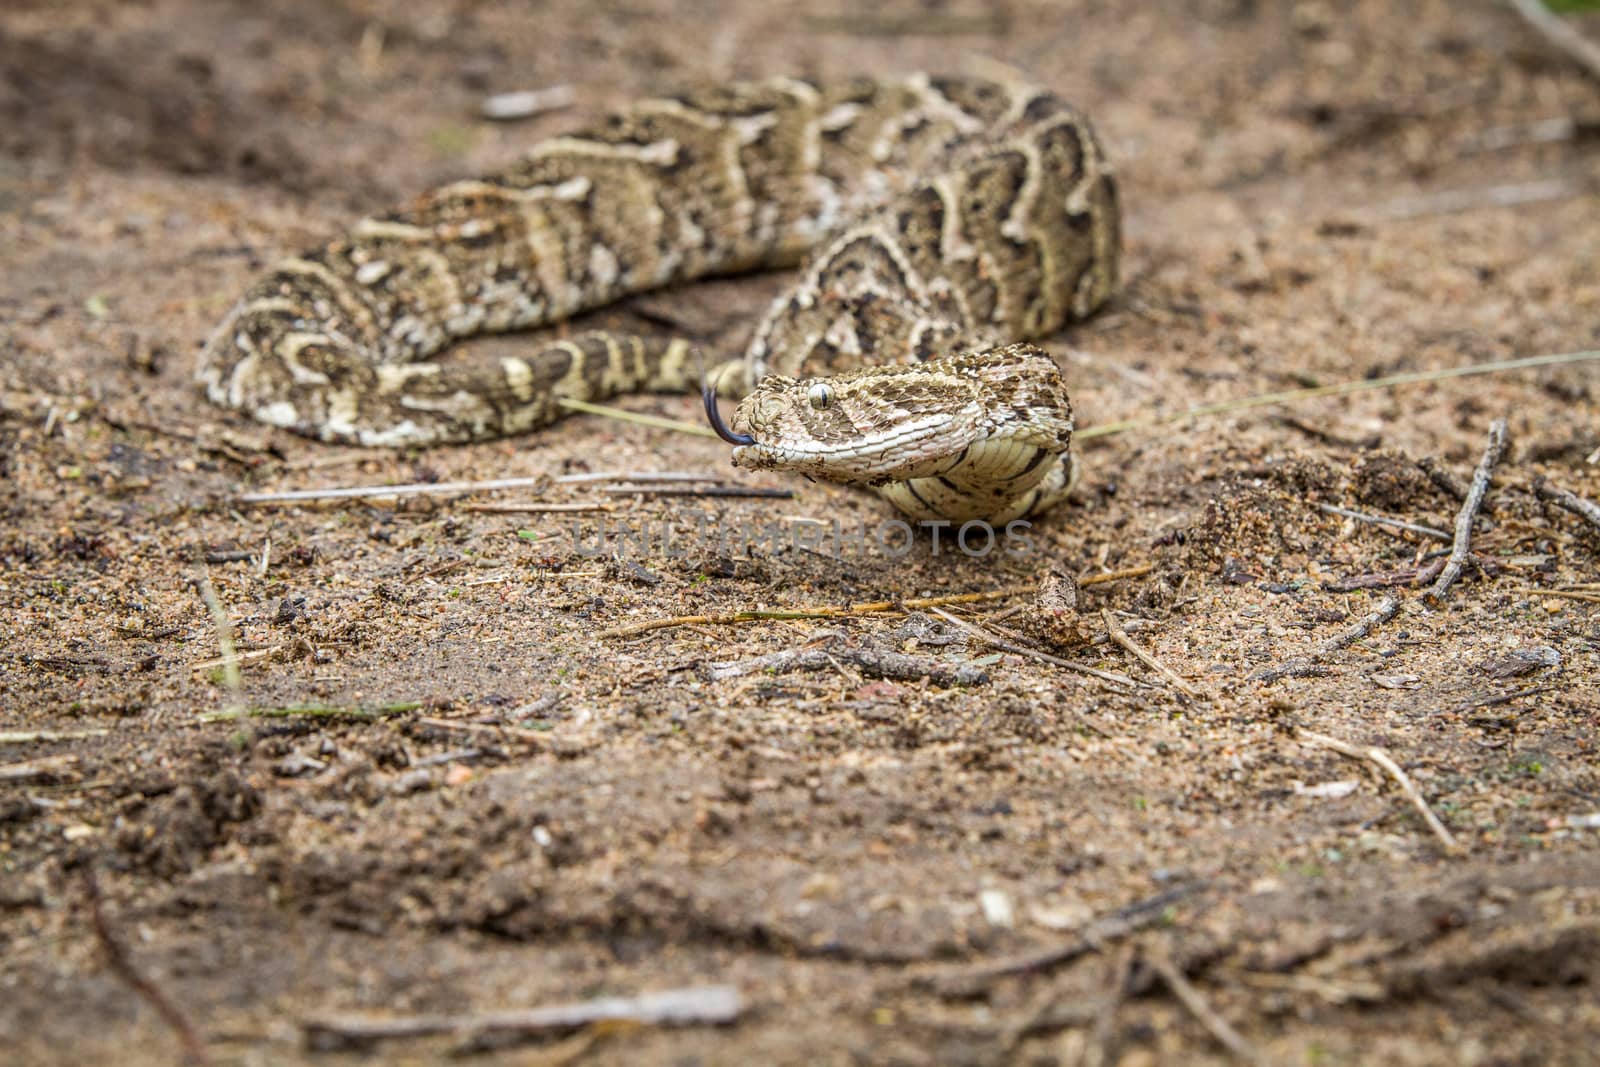 Puff adder on the ground. by Simoneemanphotography